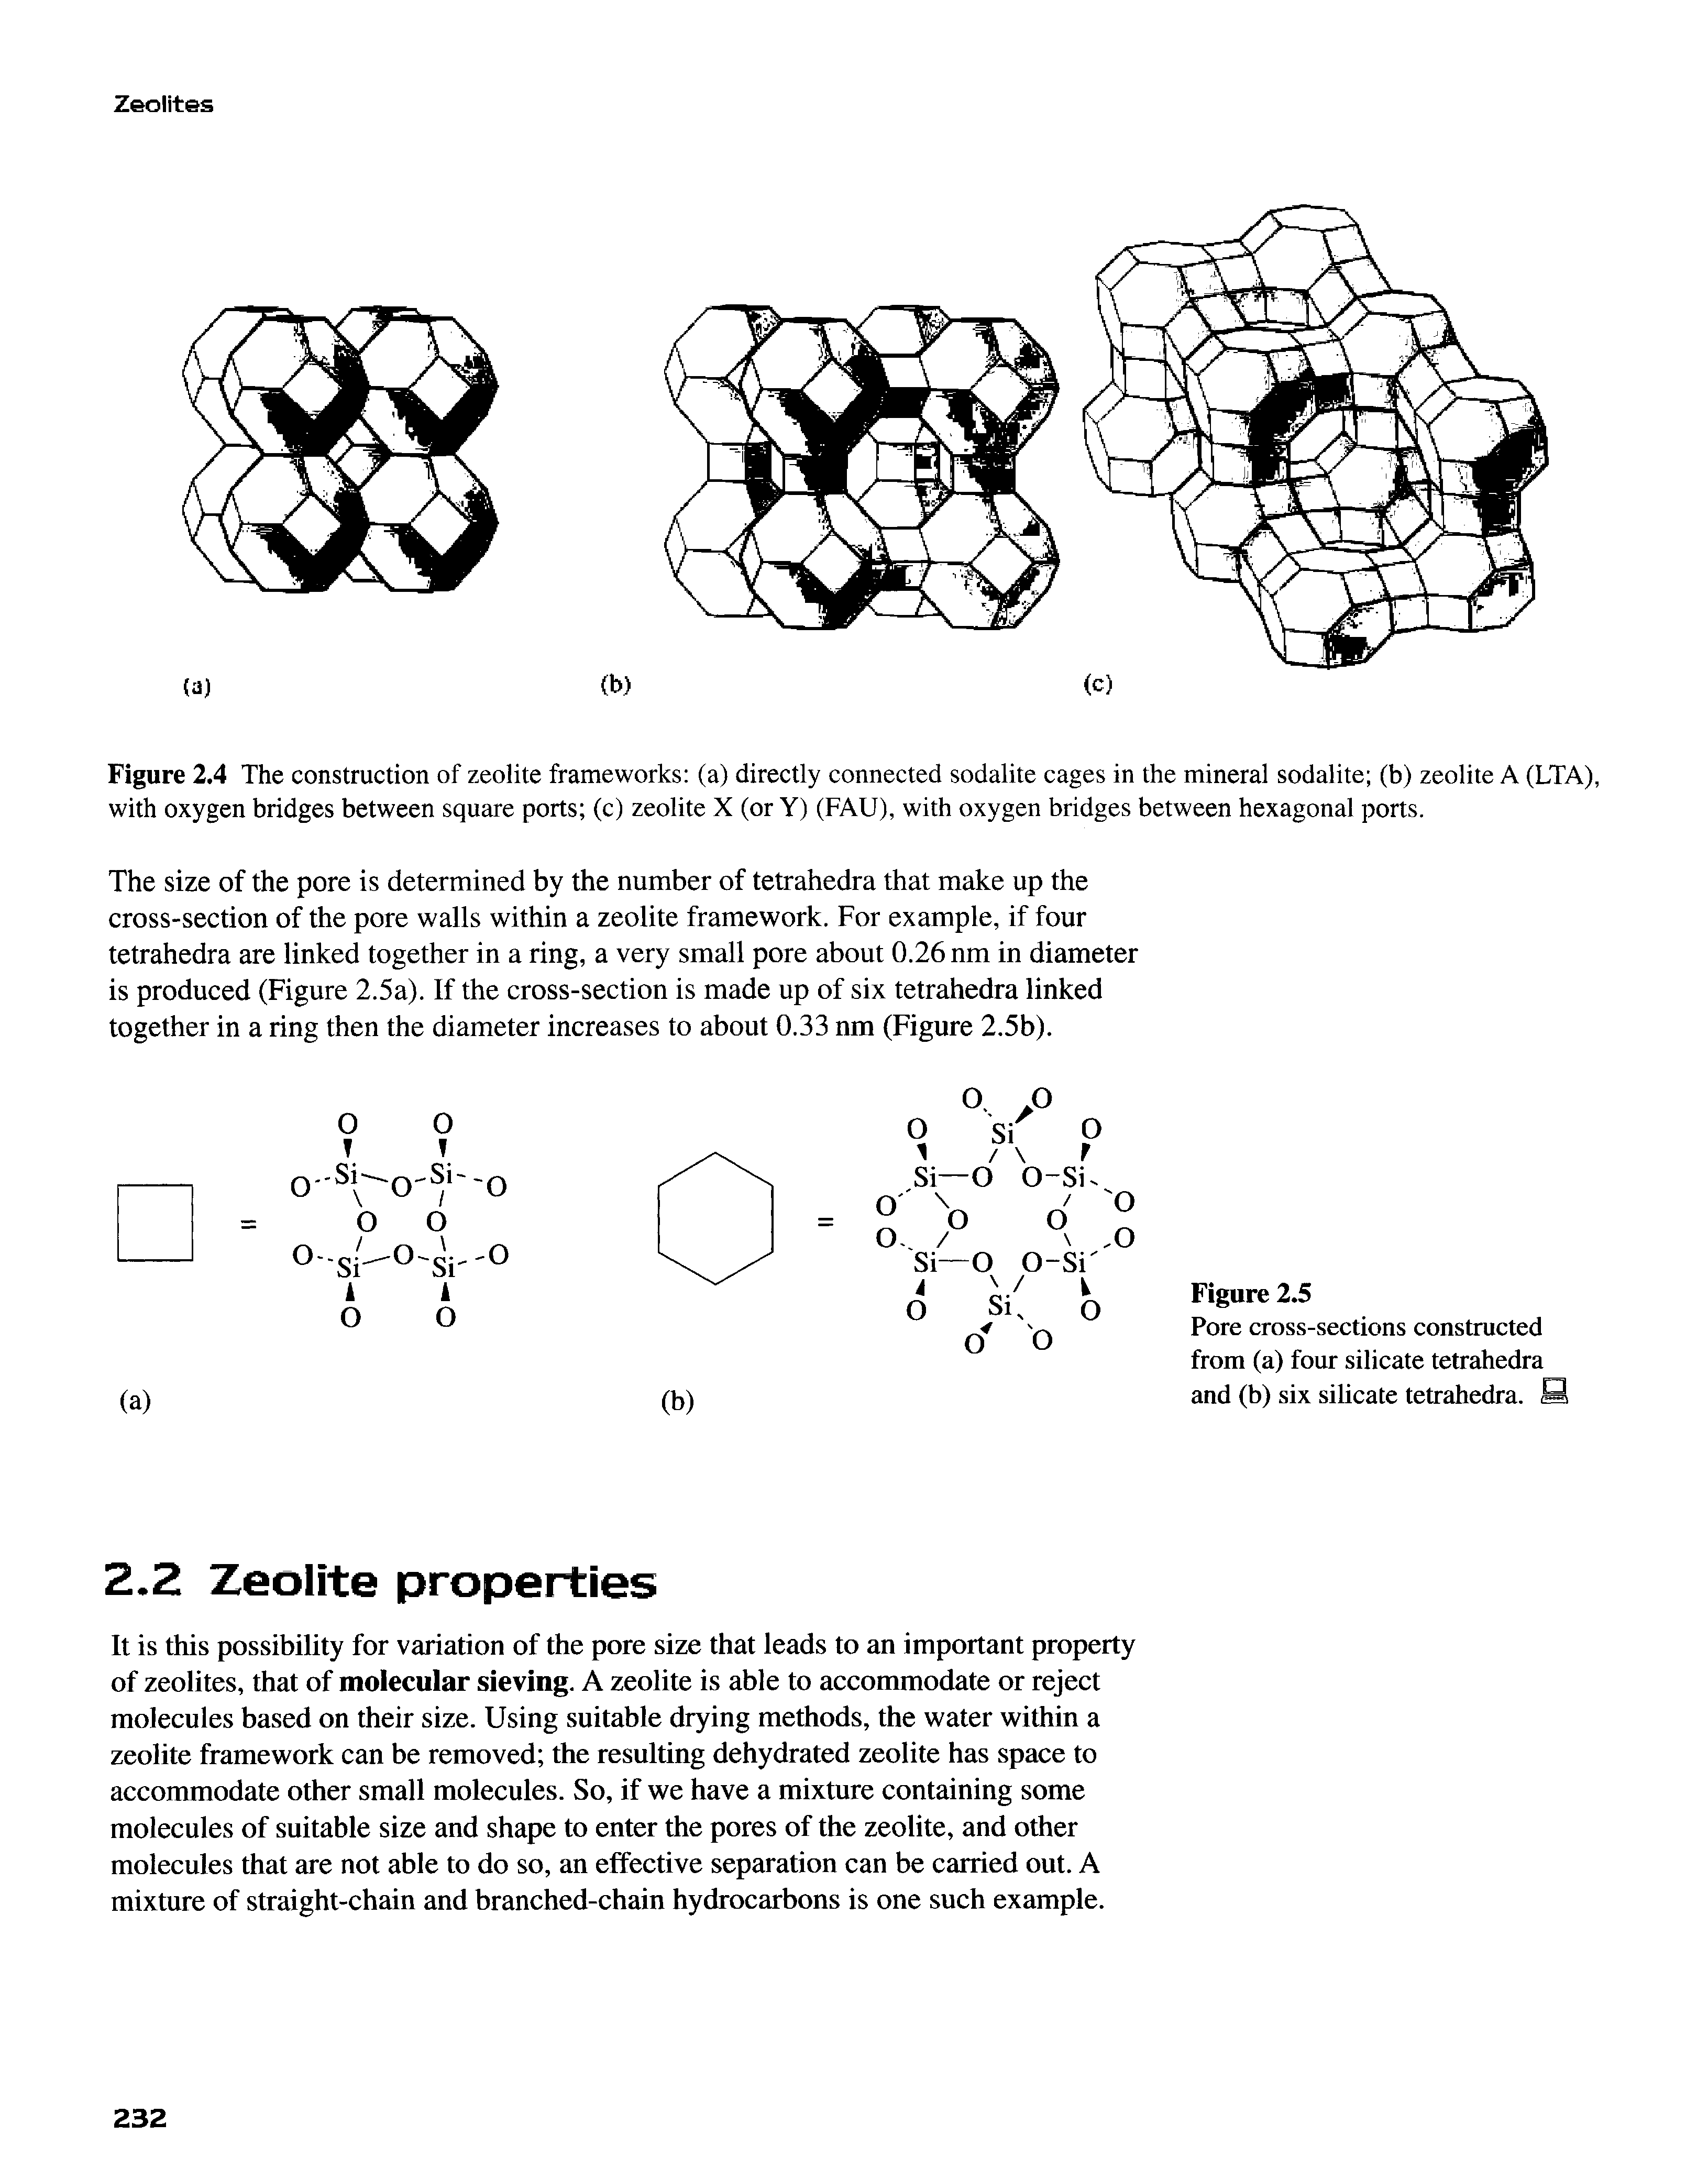 Figure 2.4 The construction of zeolite frameworks (a) directly connected sodalite cages in the mineral sodalite (b) zeolite A (LTA), with oxygen bridges between square ports (c) zeolite X (or Y) (FAU), with oxygen bridges between hexagonal ports.